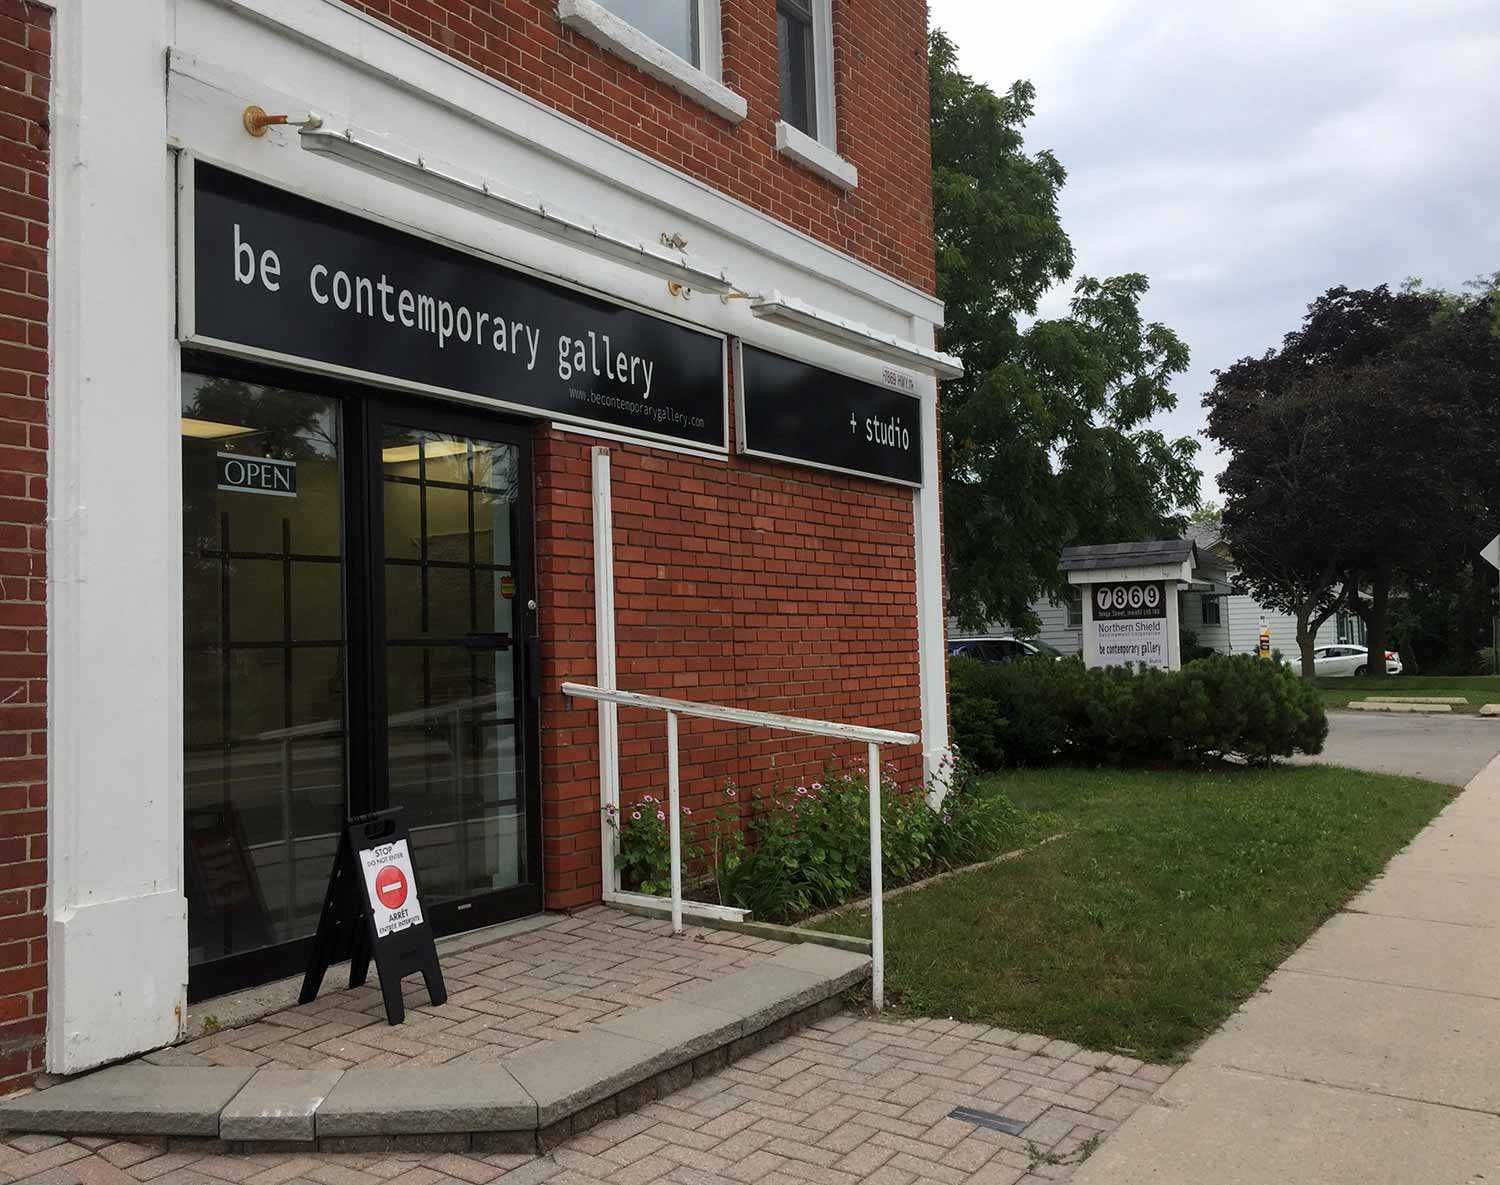 Be Contemporary Gallery